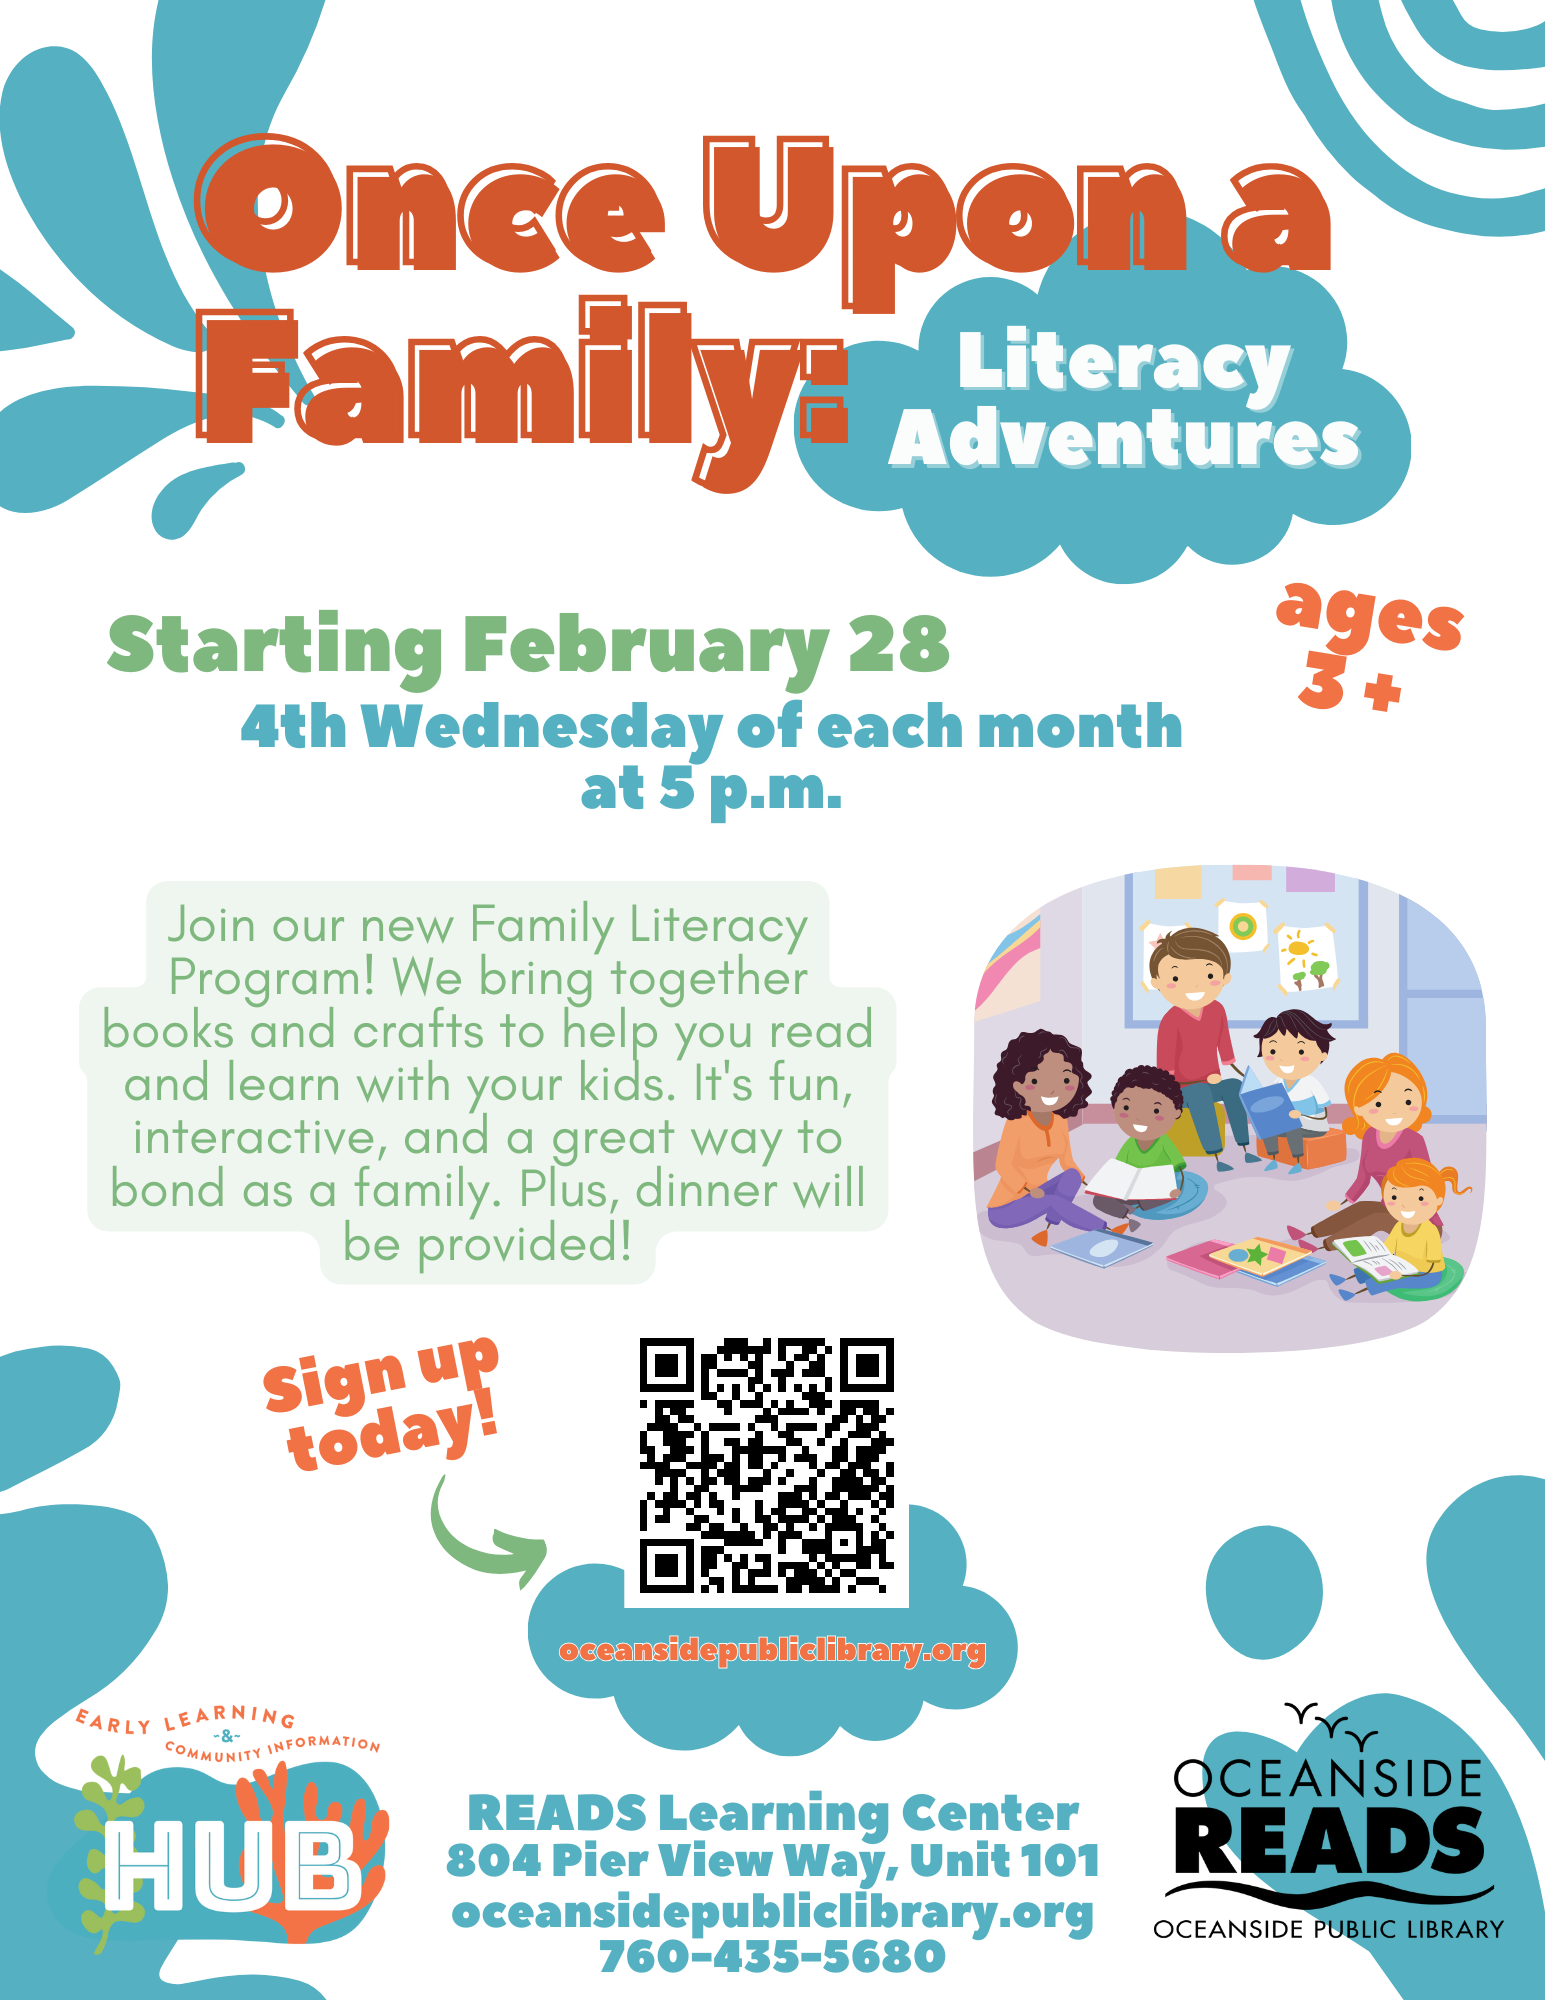 Once Upon a Family: Literacy Adventures